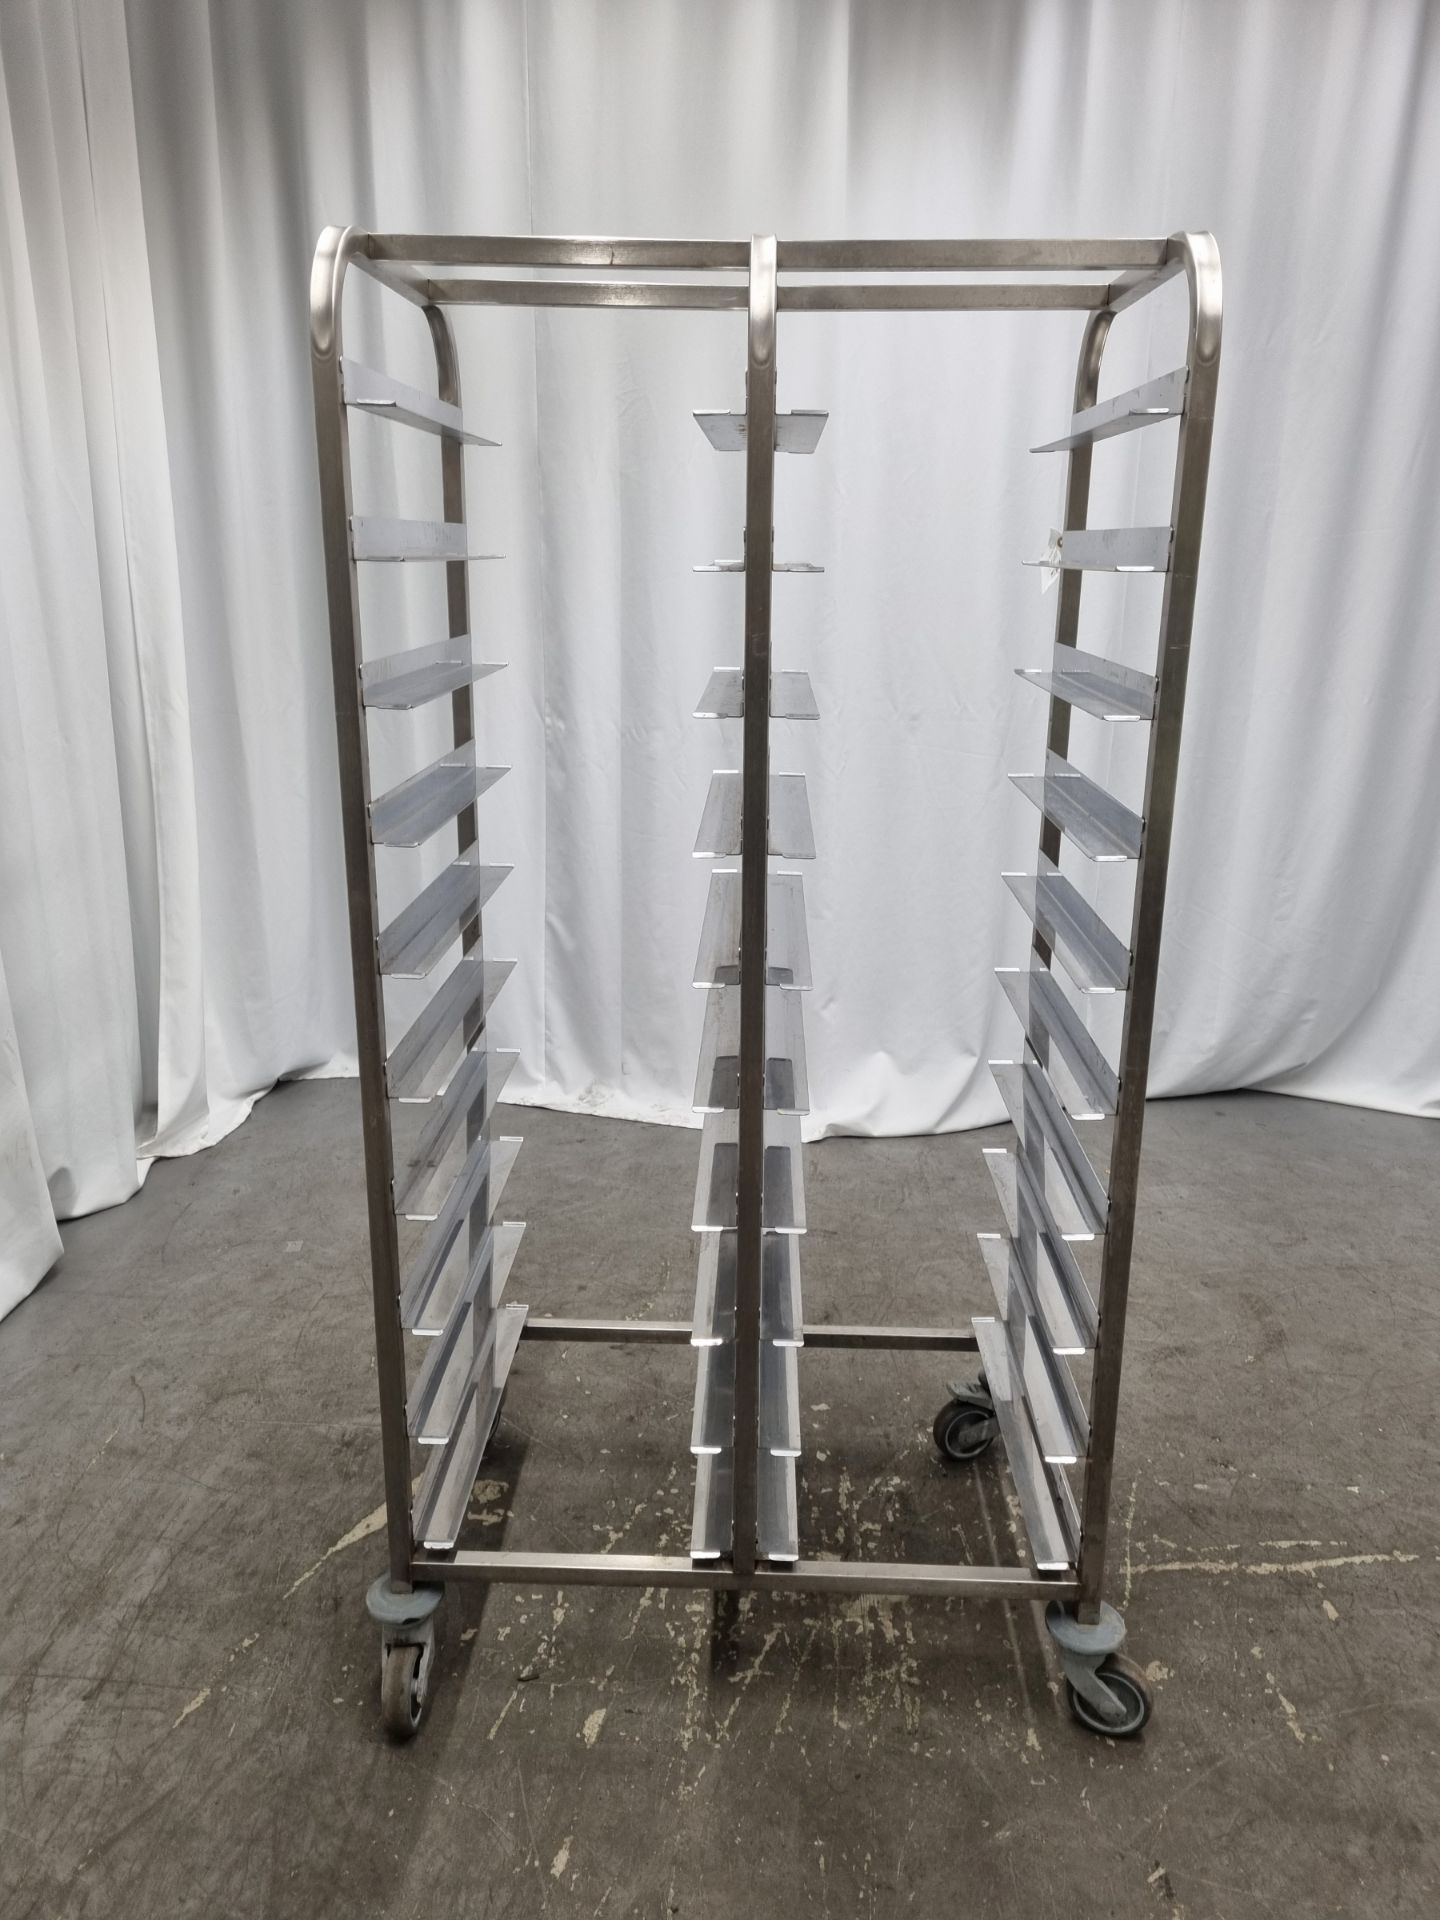 Stainless steel twin tray catering racking on wheels - Image 3 of 4